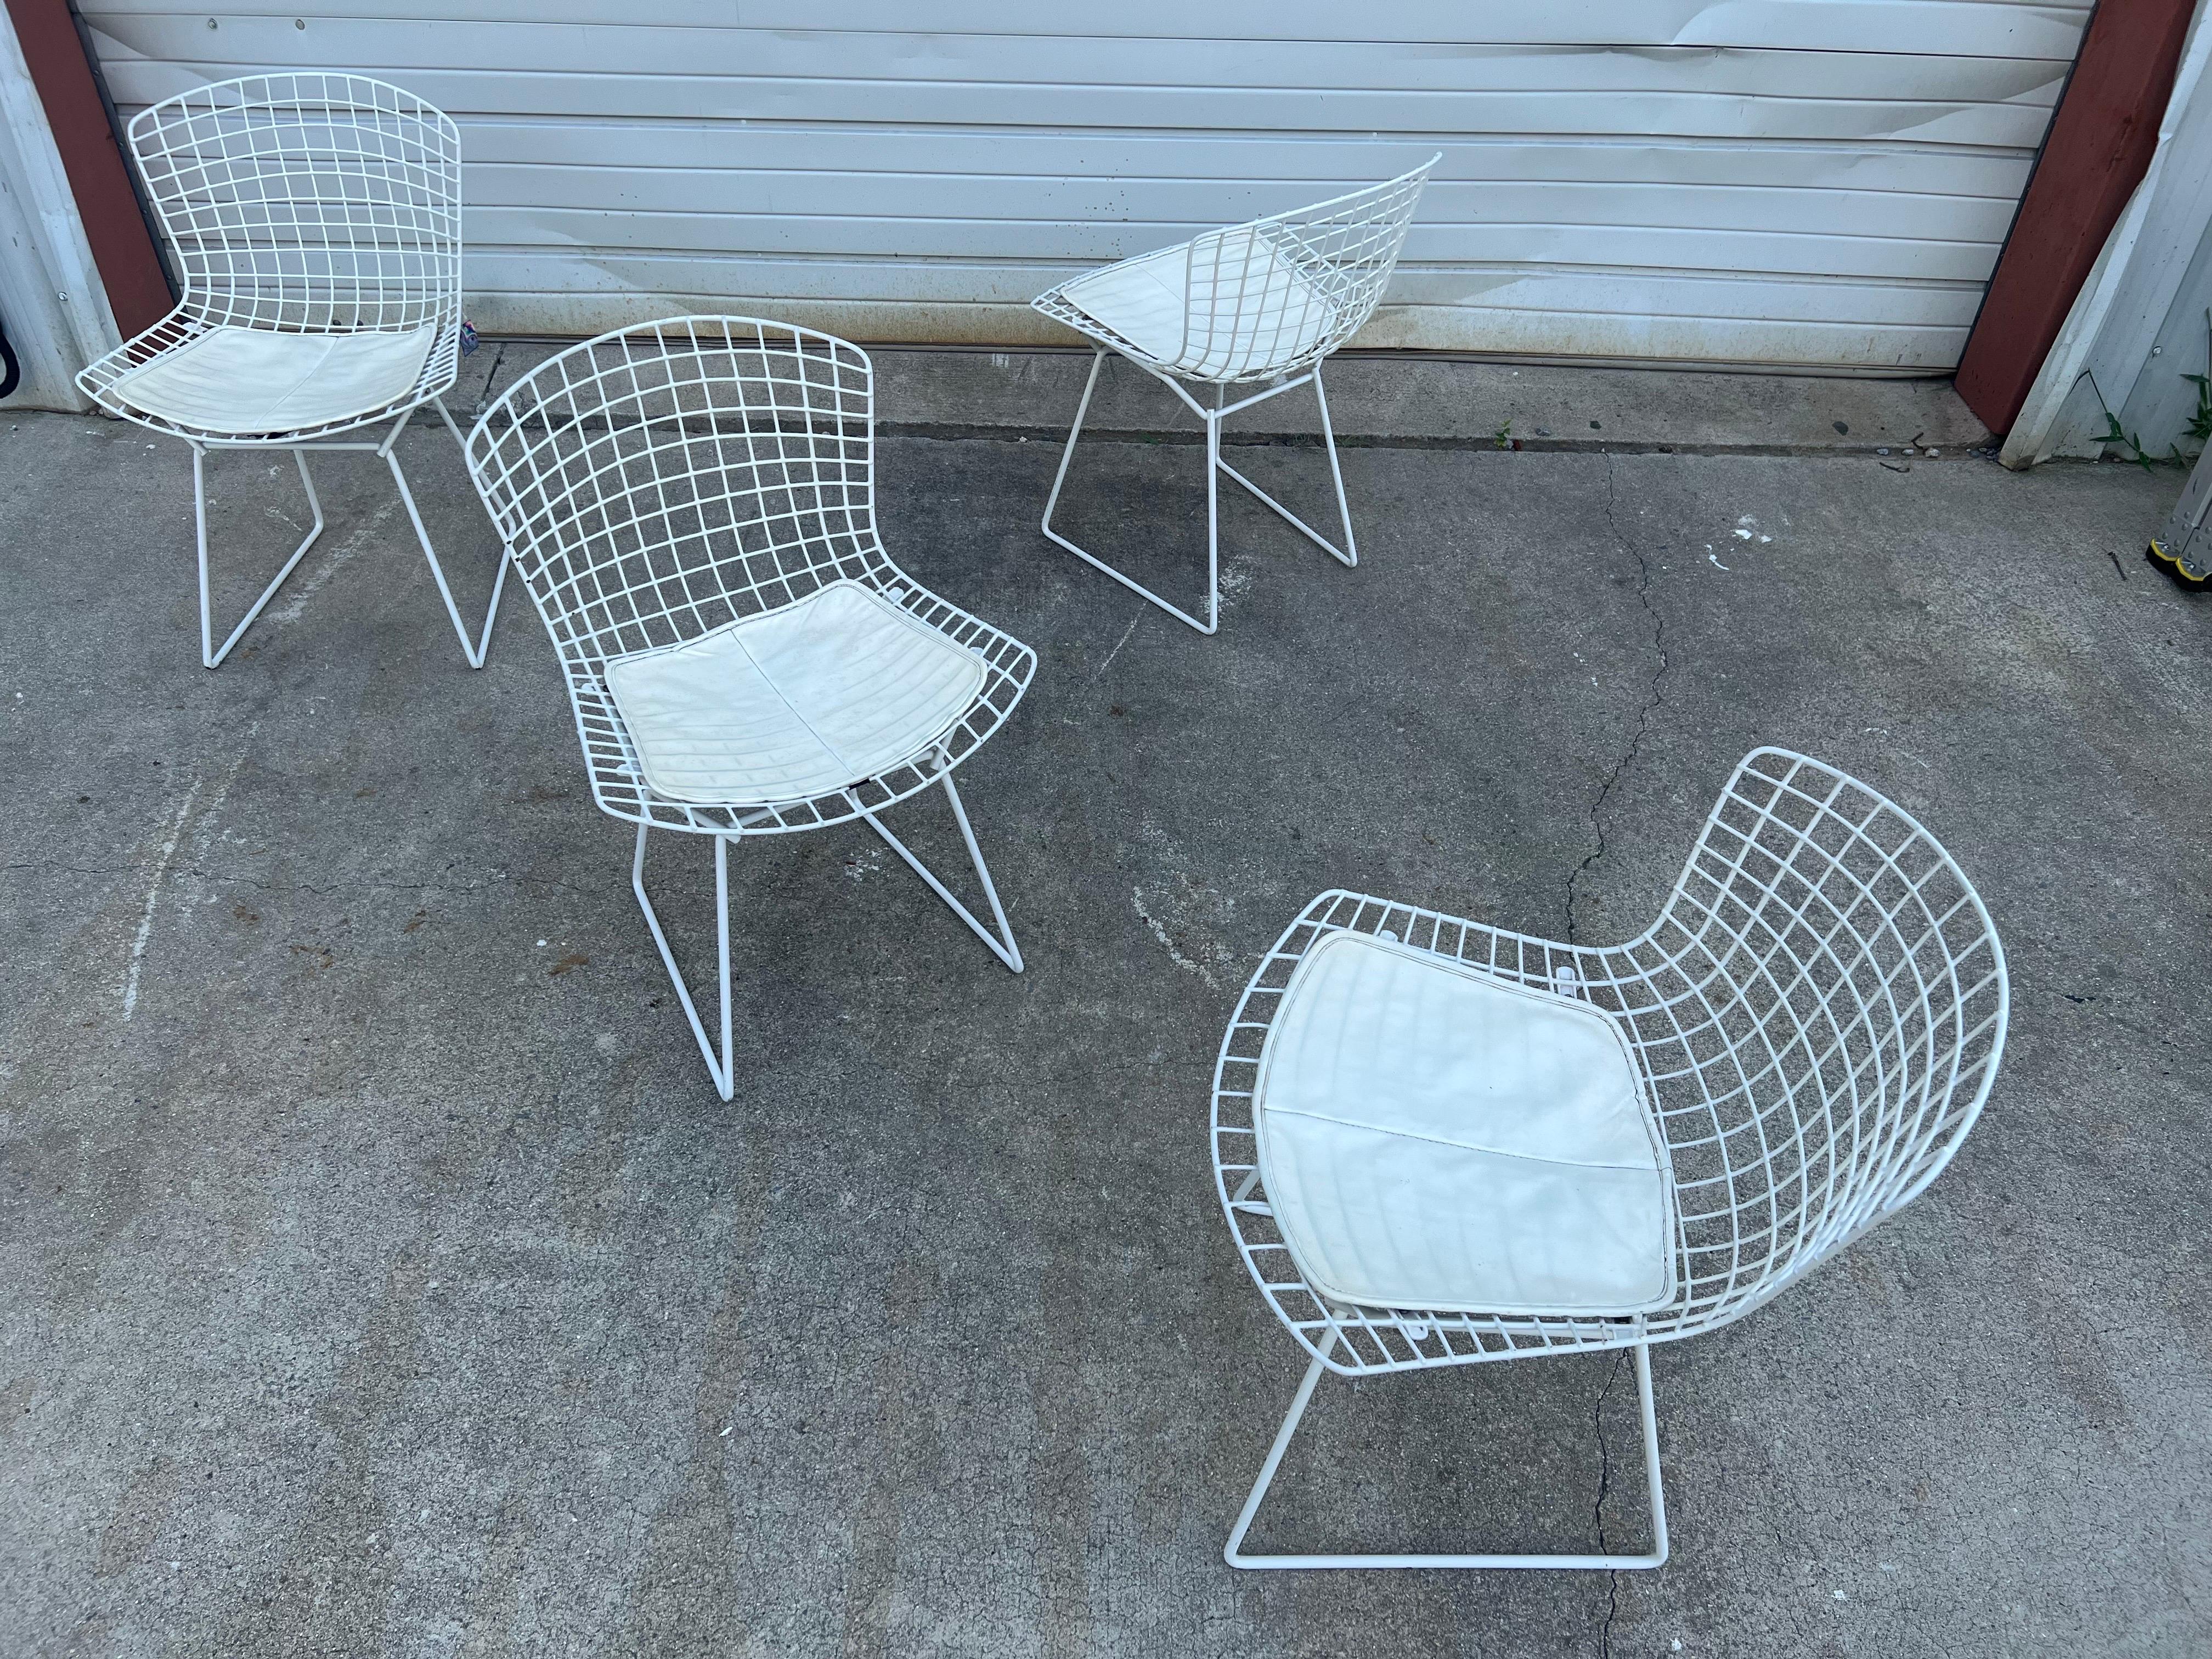 Four chairs designed by Harry Bertoia for Knoll Manufacturing, circa 1960s. These chairs have several ways in which they can function: dining, outdoor, and accent. Each chair has its original white finish, with minor chipping and wear throughout.